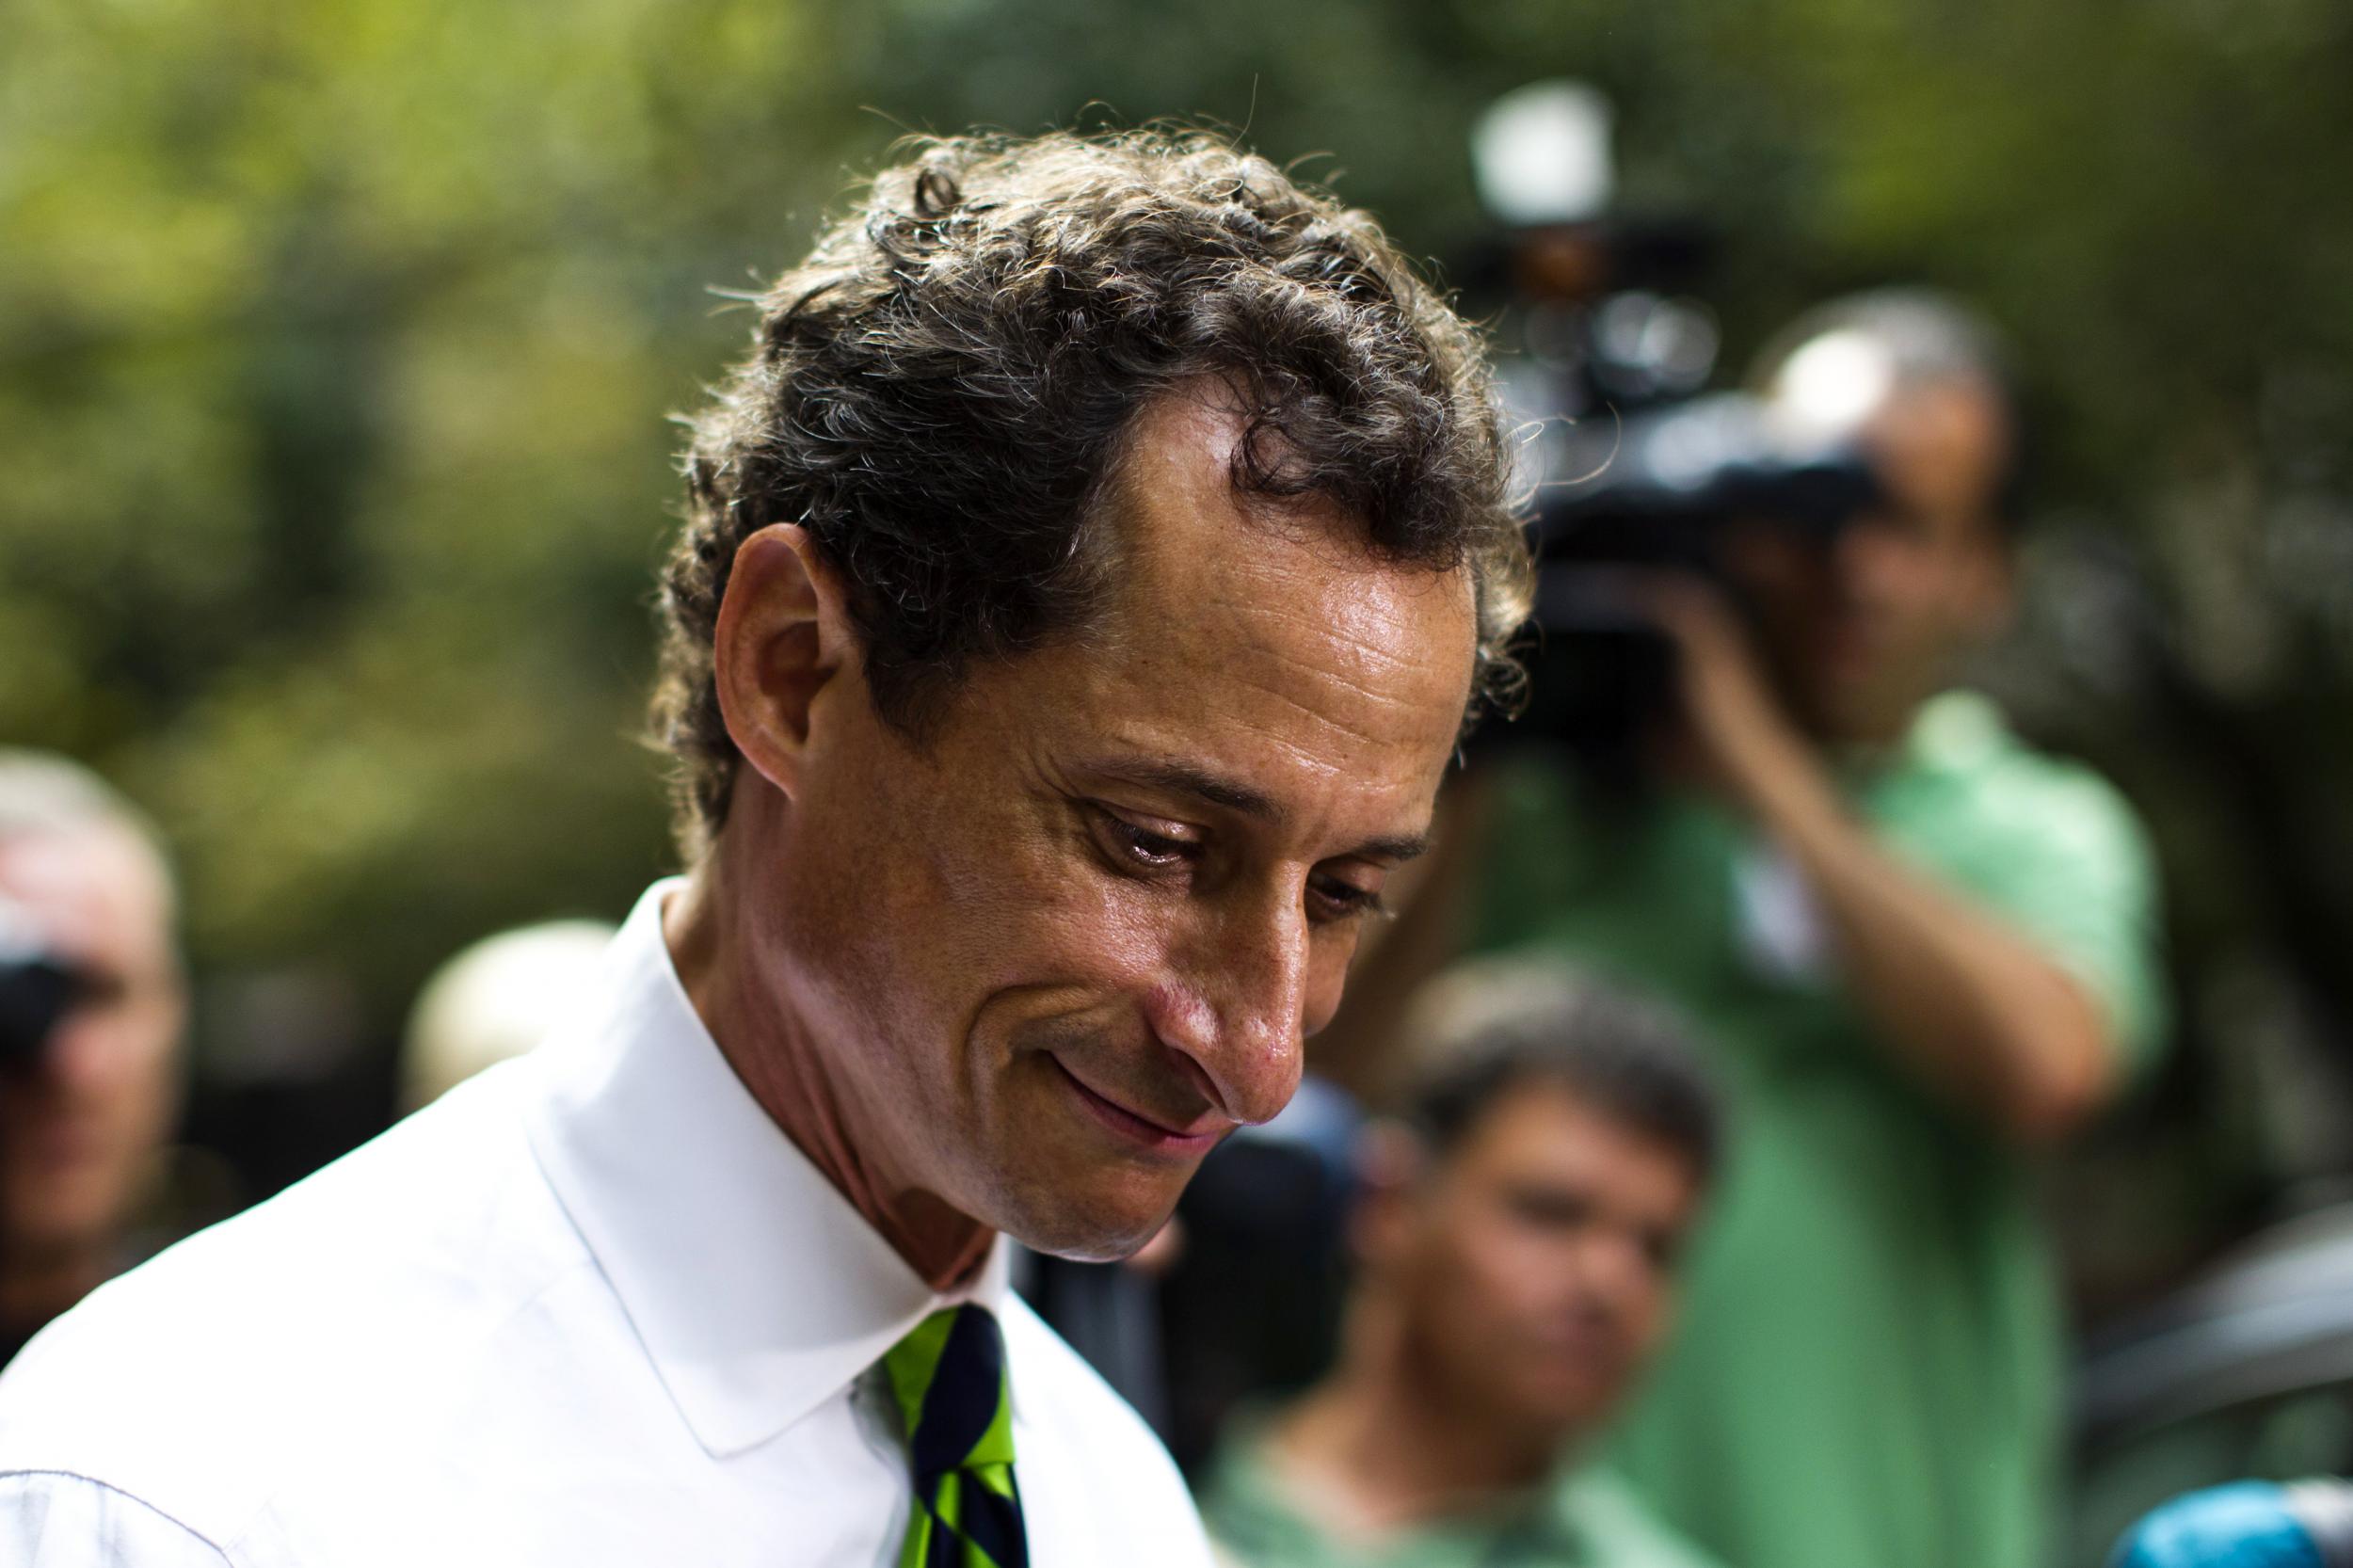 Anthony Weiner was forced to drop out of the race for New York mayor in 2013 when sexting allegations resurfaced